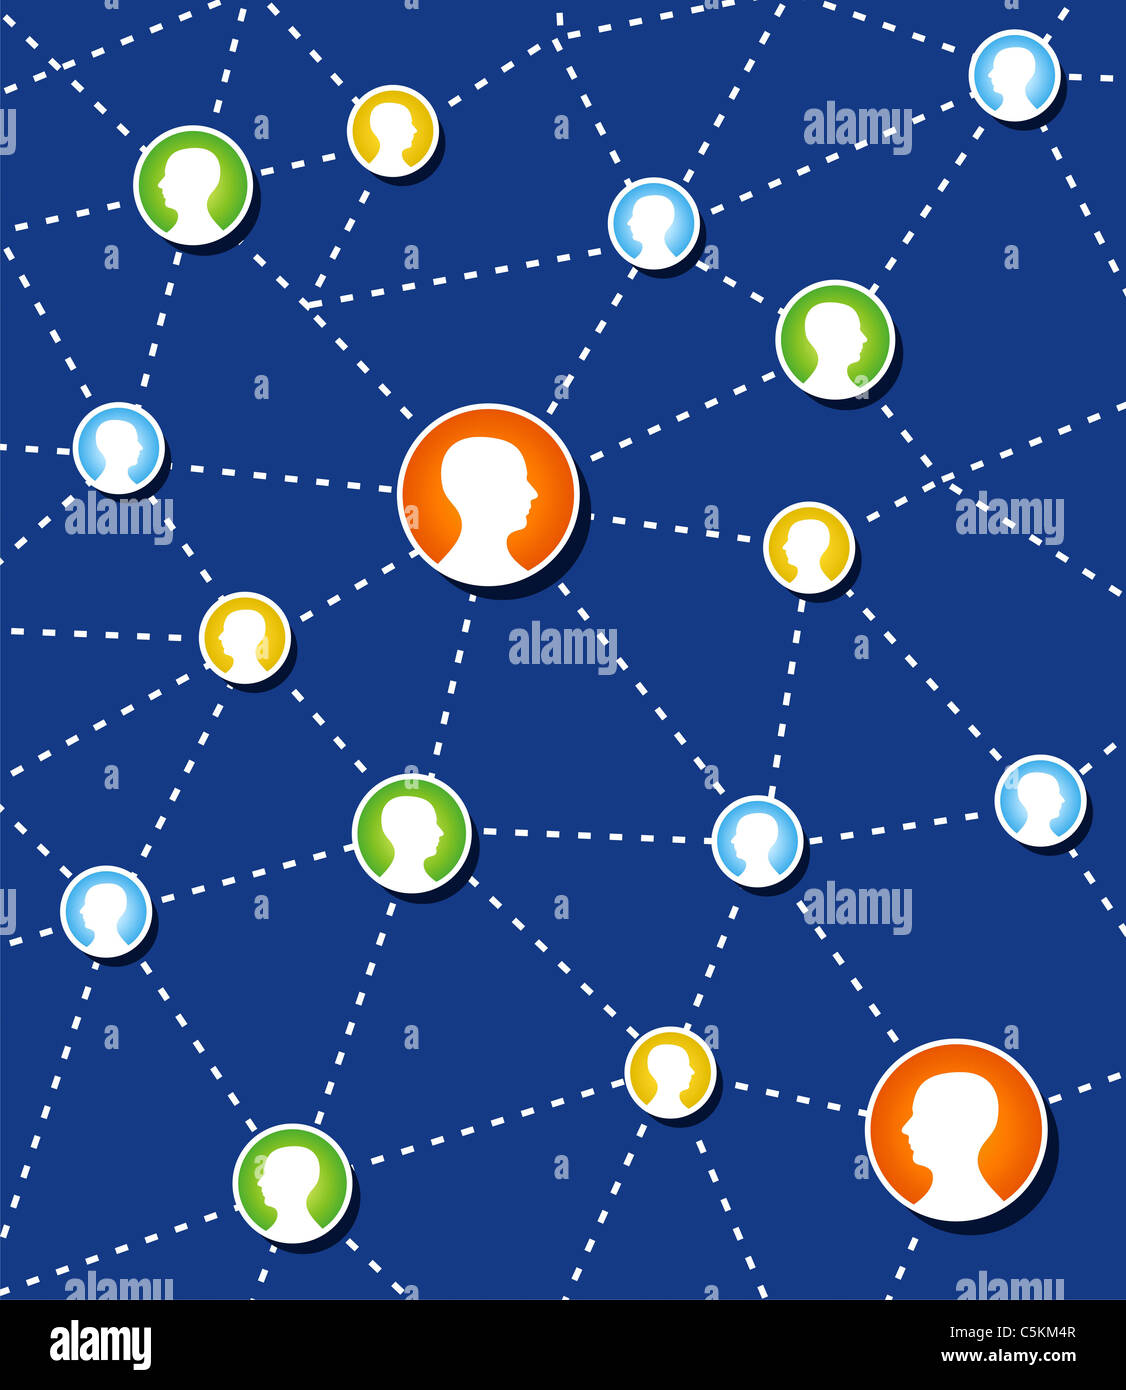 Web social relationship diagram showing human head silhouettes connected by colorful circles. Stock Photo